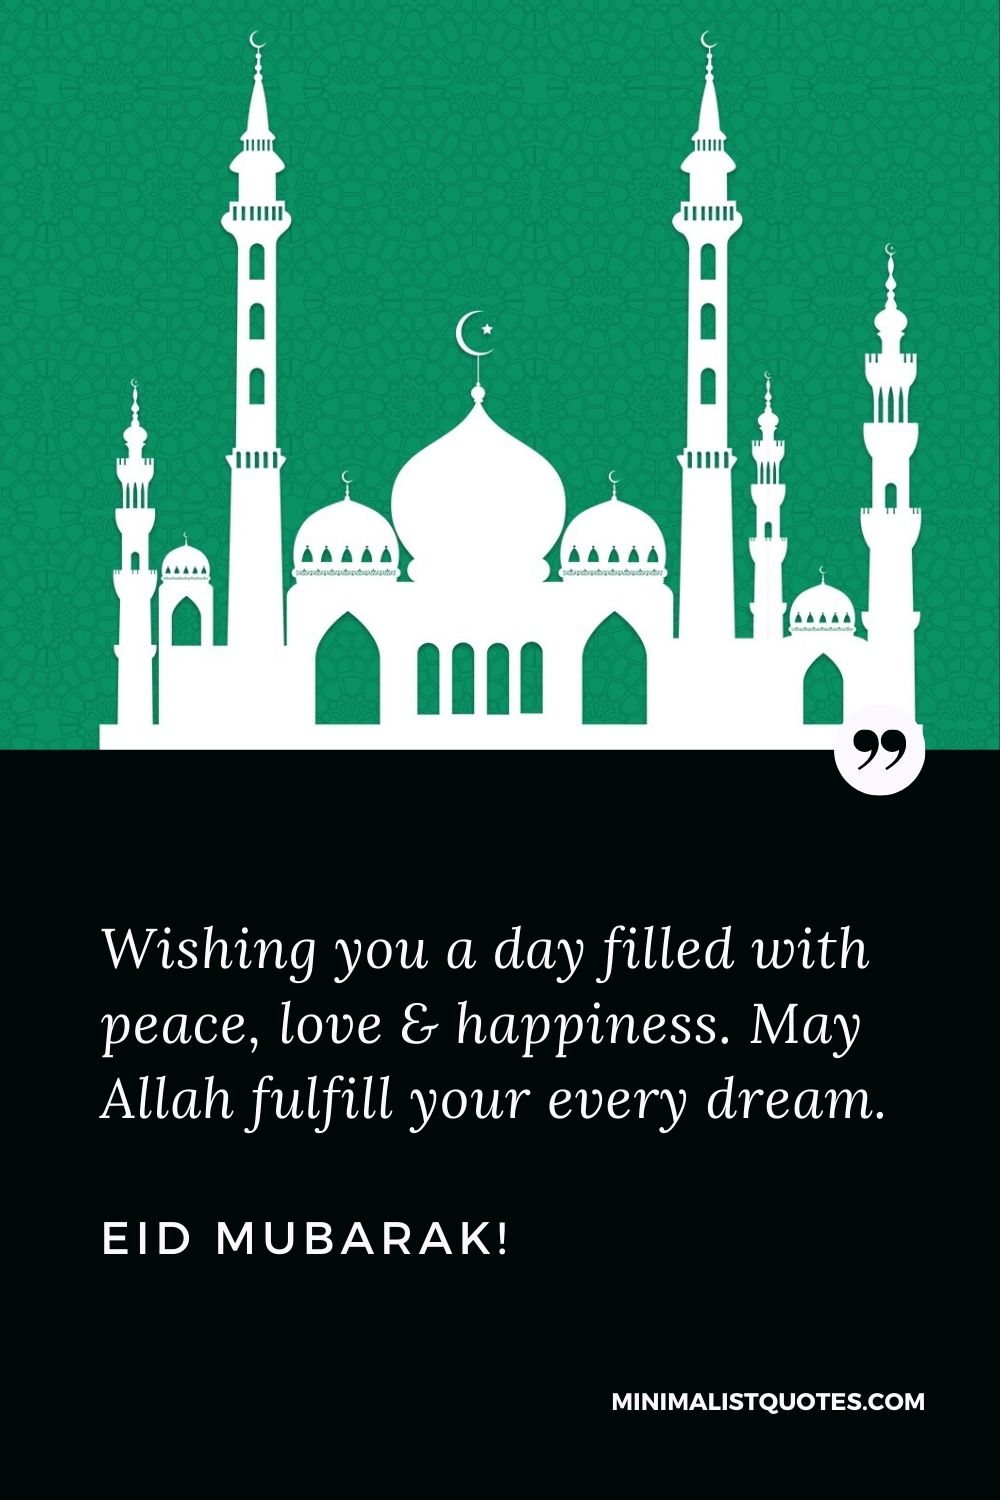 Eid Quote, Wish & Message With Image: Wishing you a day filled with peace, love & happiness. May Allah fulfill your every dream. Eid Mubarak!